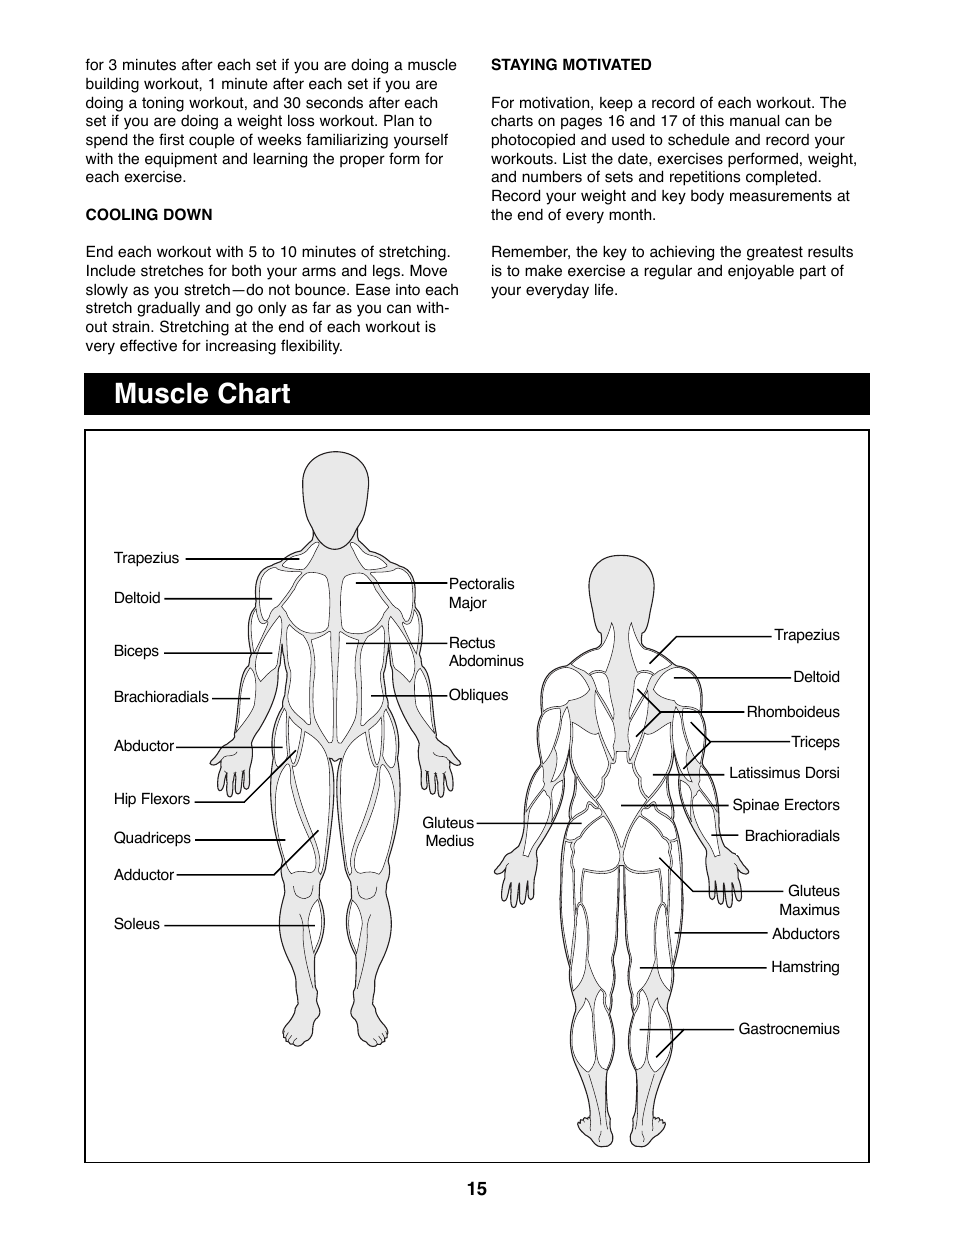 Muscle chart | Weider 148 User Manual | Page 15 / 20